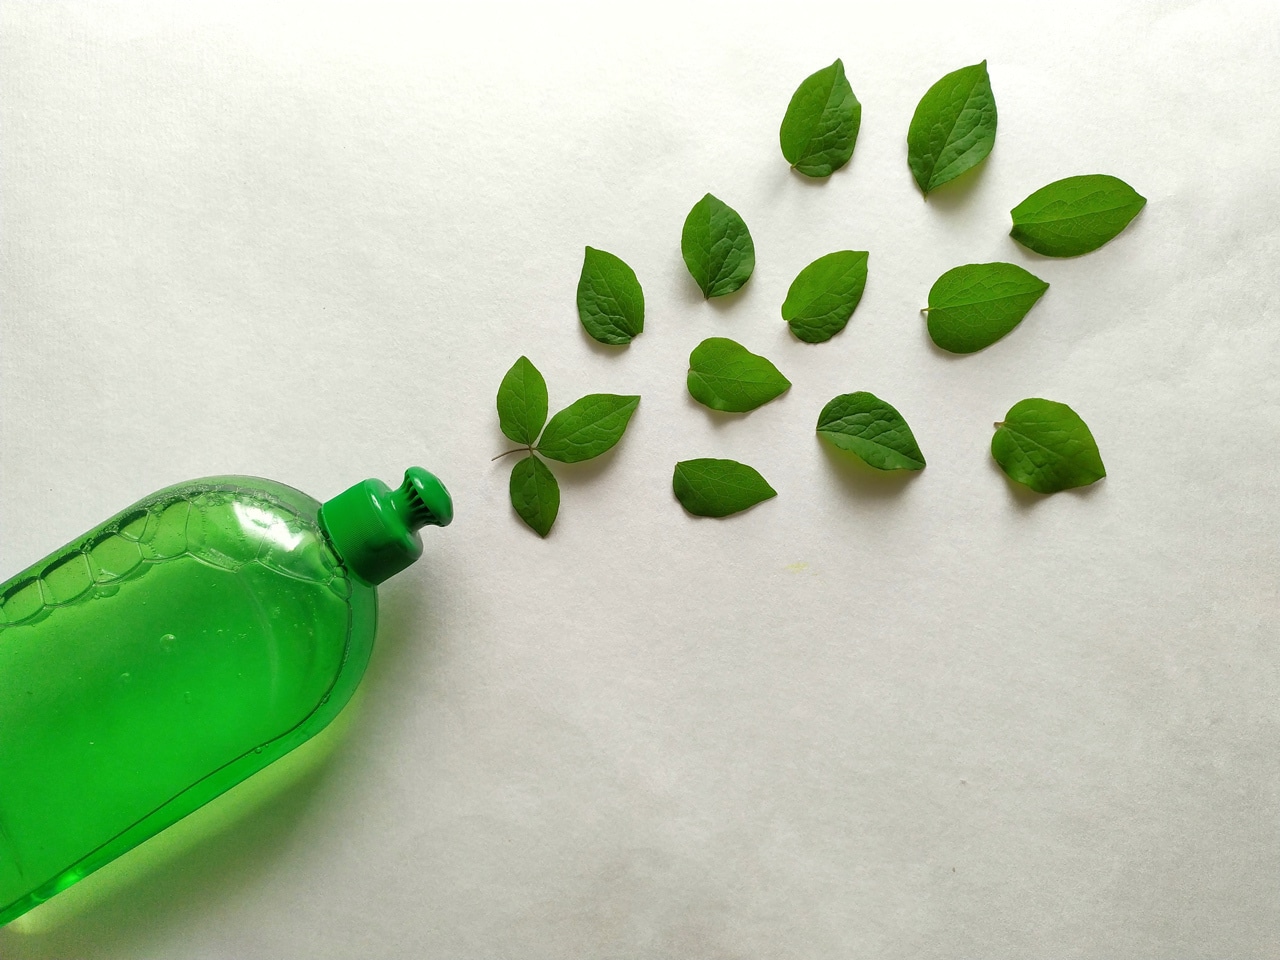 Eco-friendly cleaning product with green leaves coming out the bottle